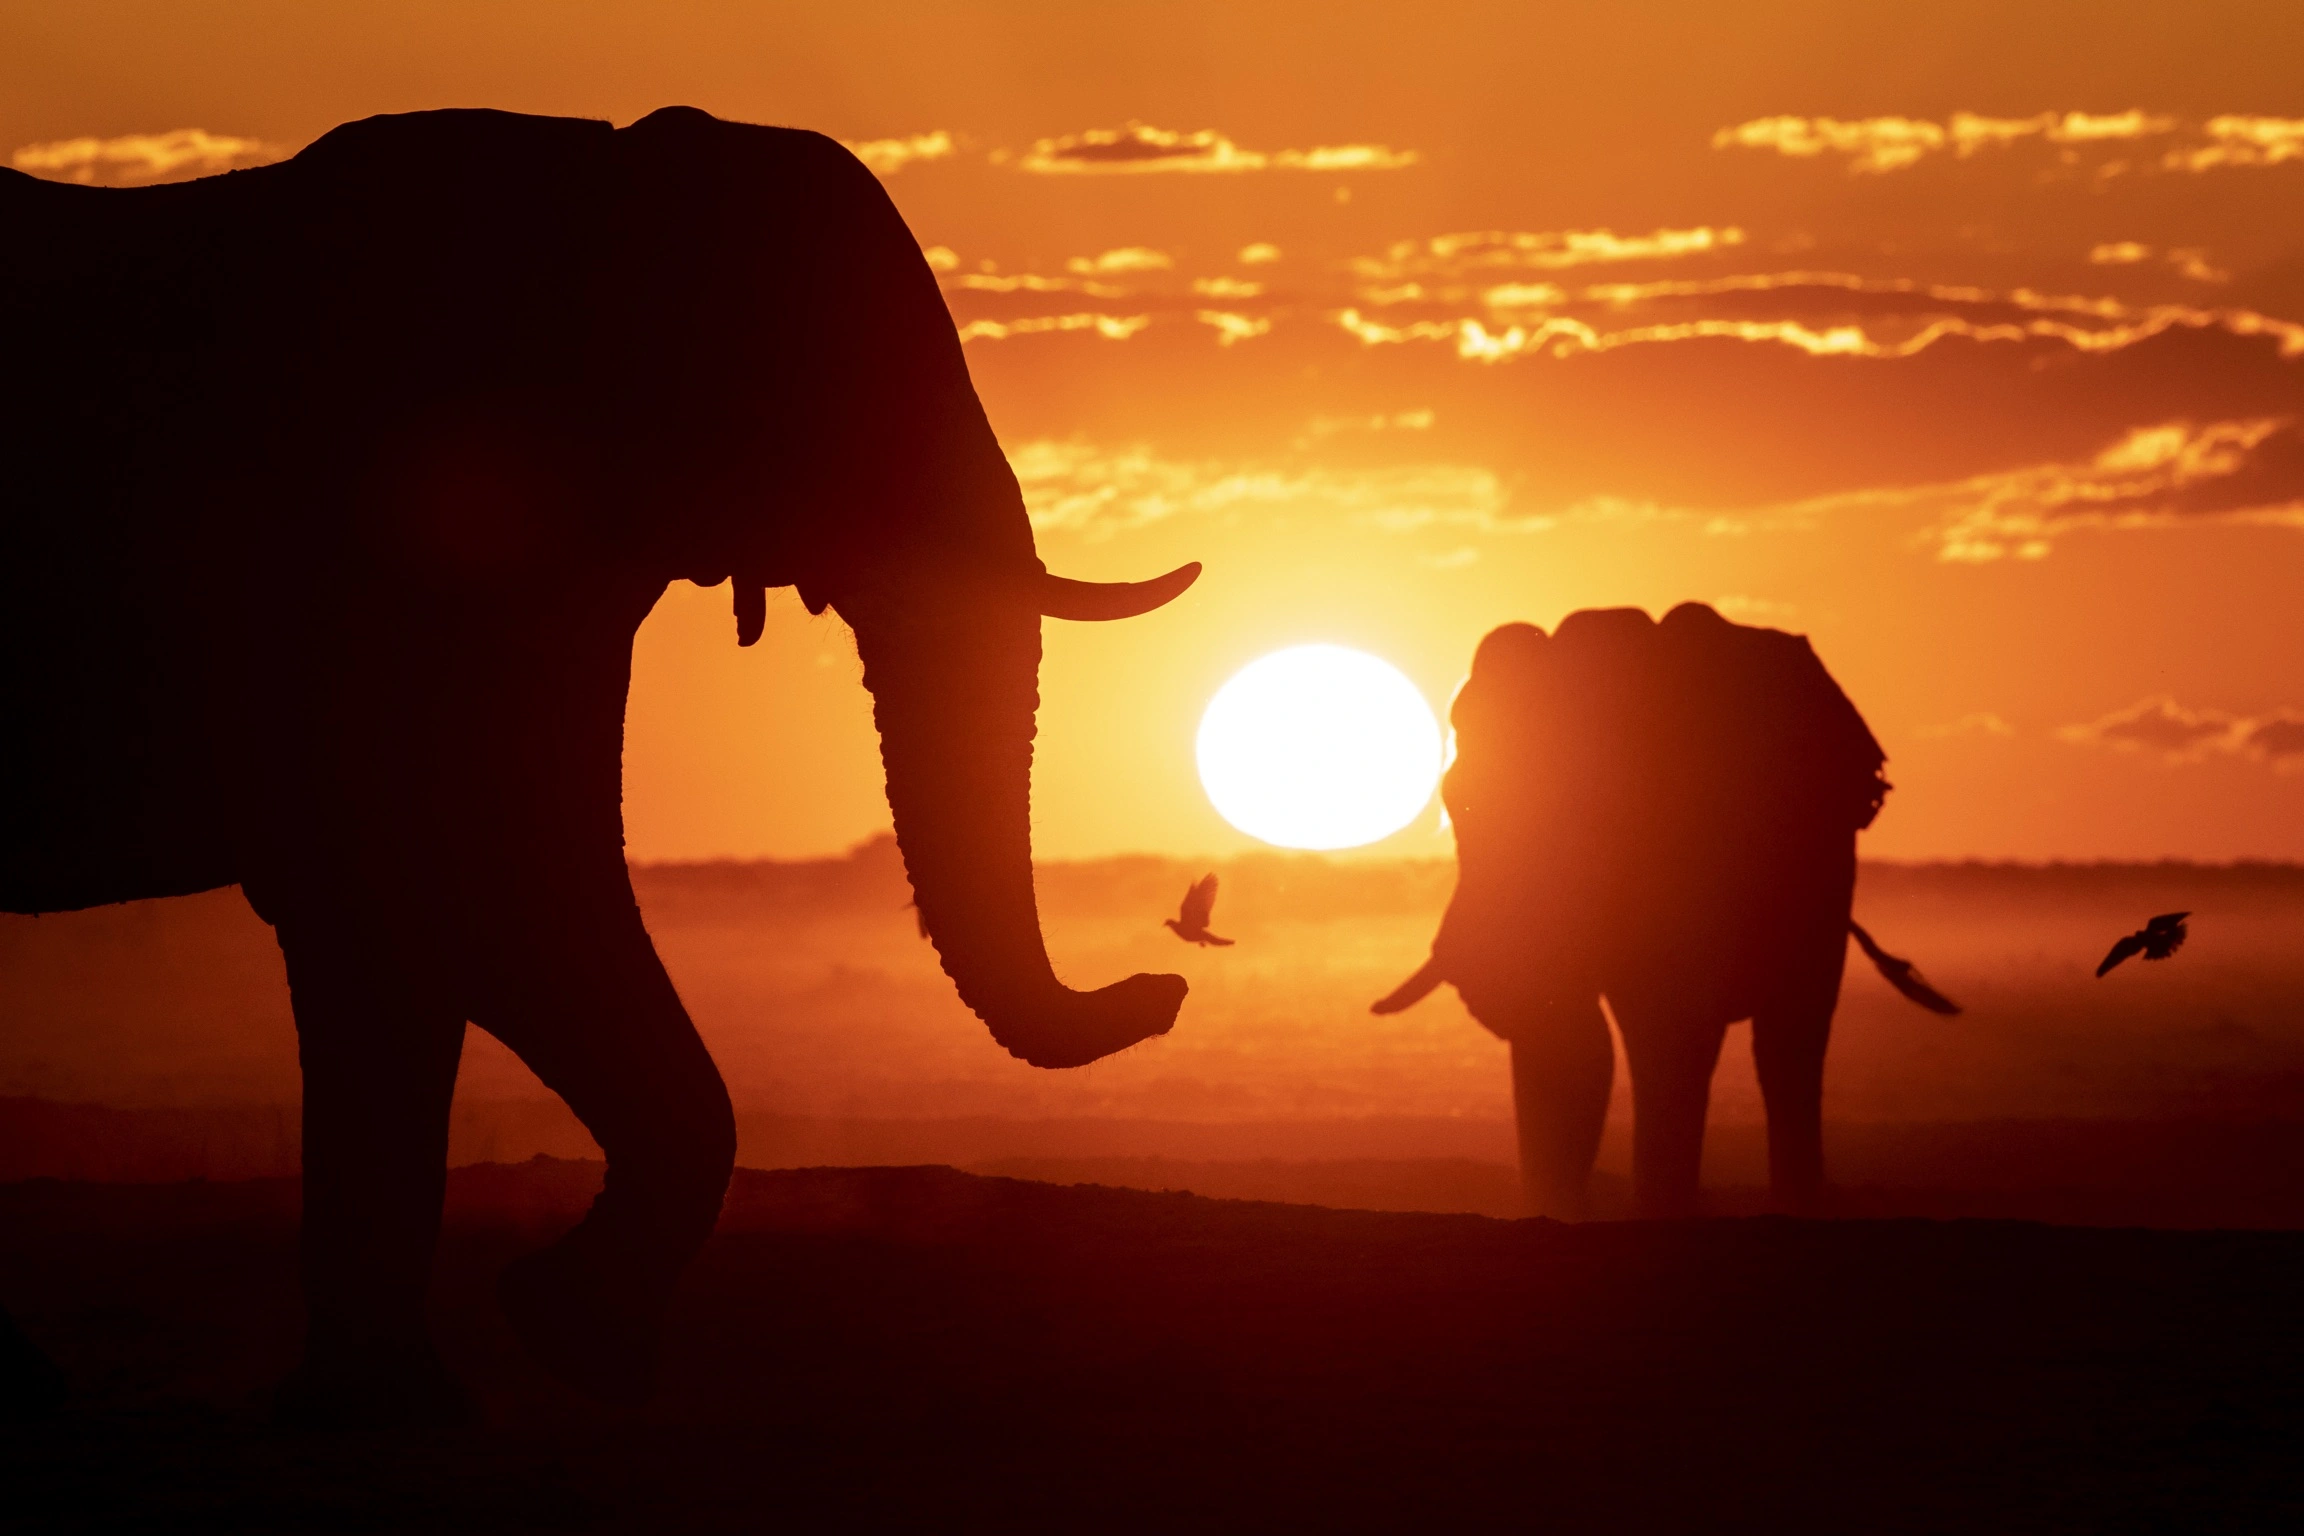 elephants at sunset by william steel